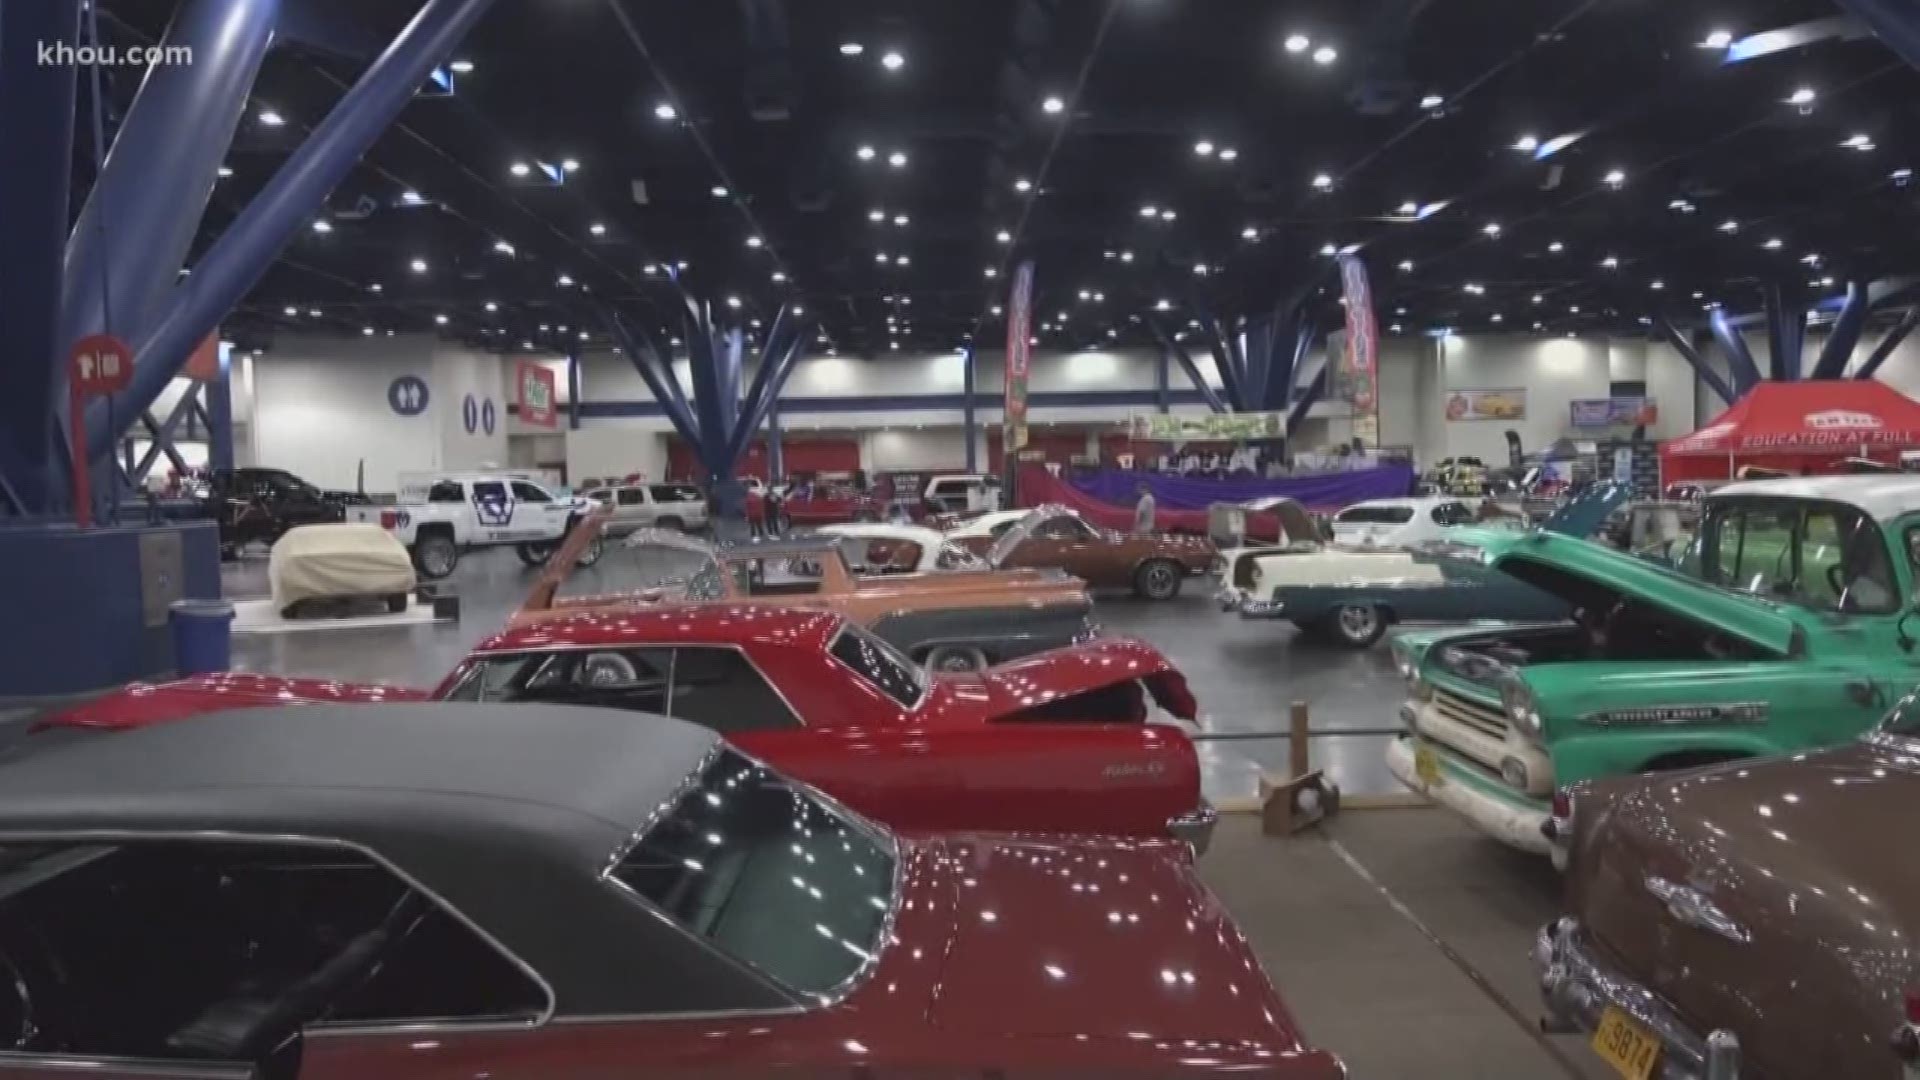 Nearly 600 classic cars and more are on display at Autorama this weekend at the GRB.